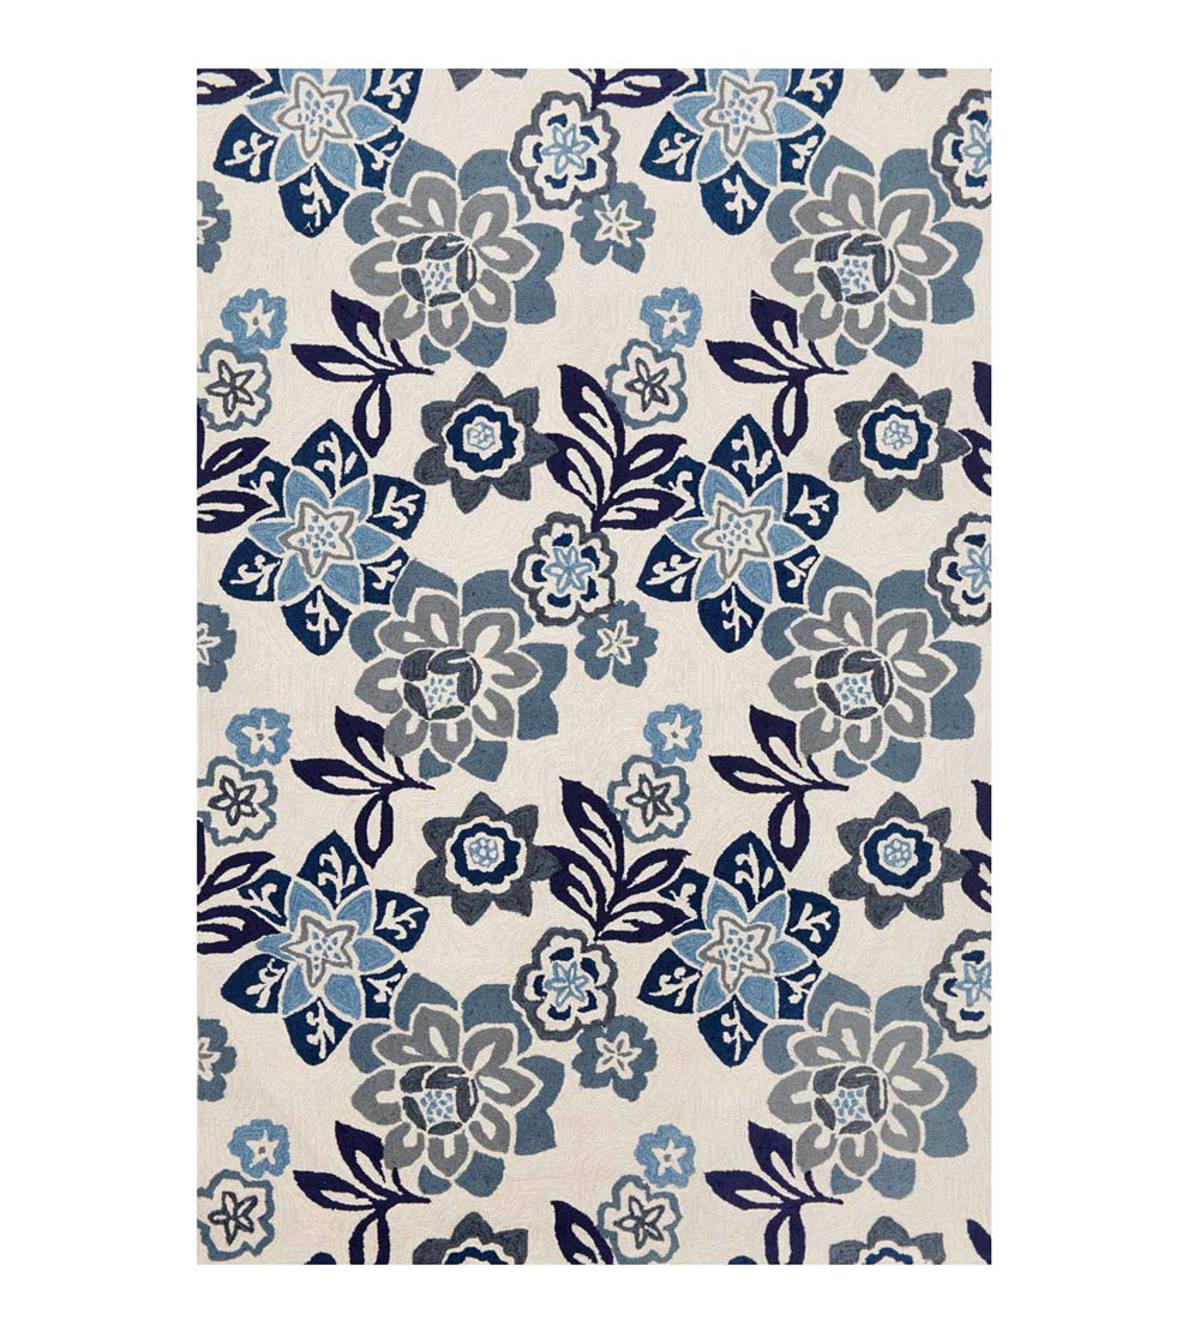 China Blue Floral Accent Runner, 24"W x 8'L - China Blue